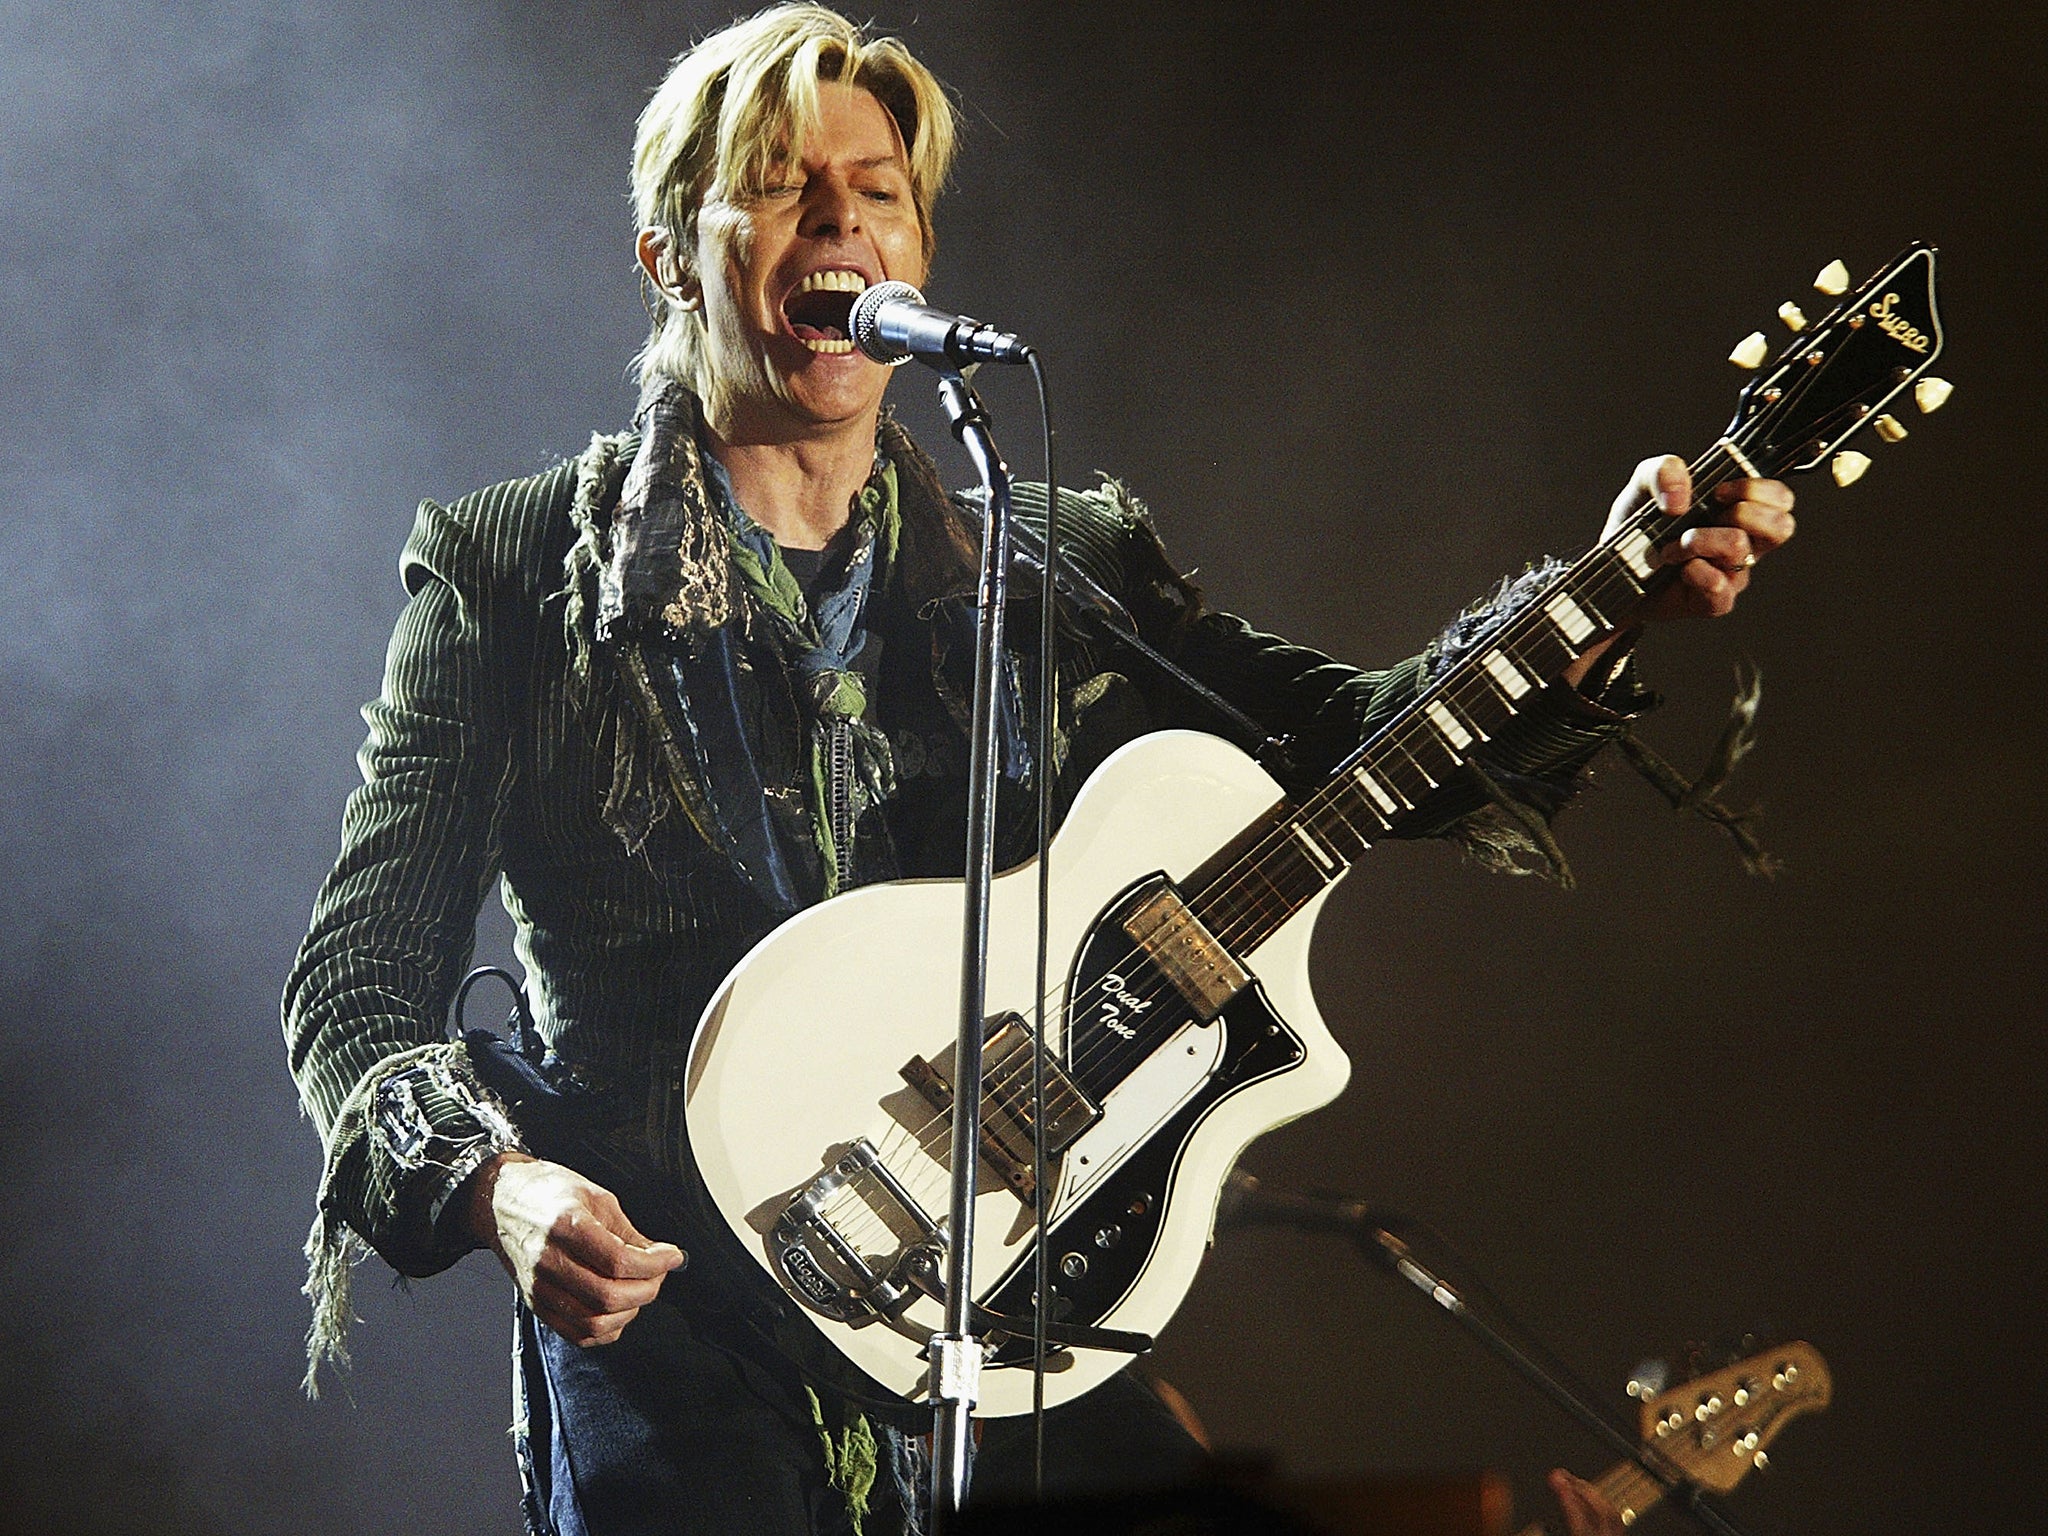 David Bowie died of cancer aged 69 in January